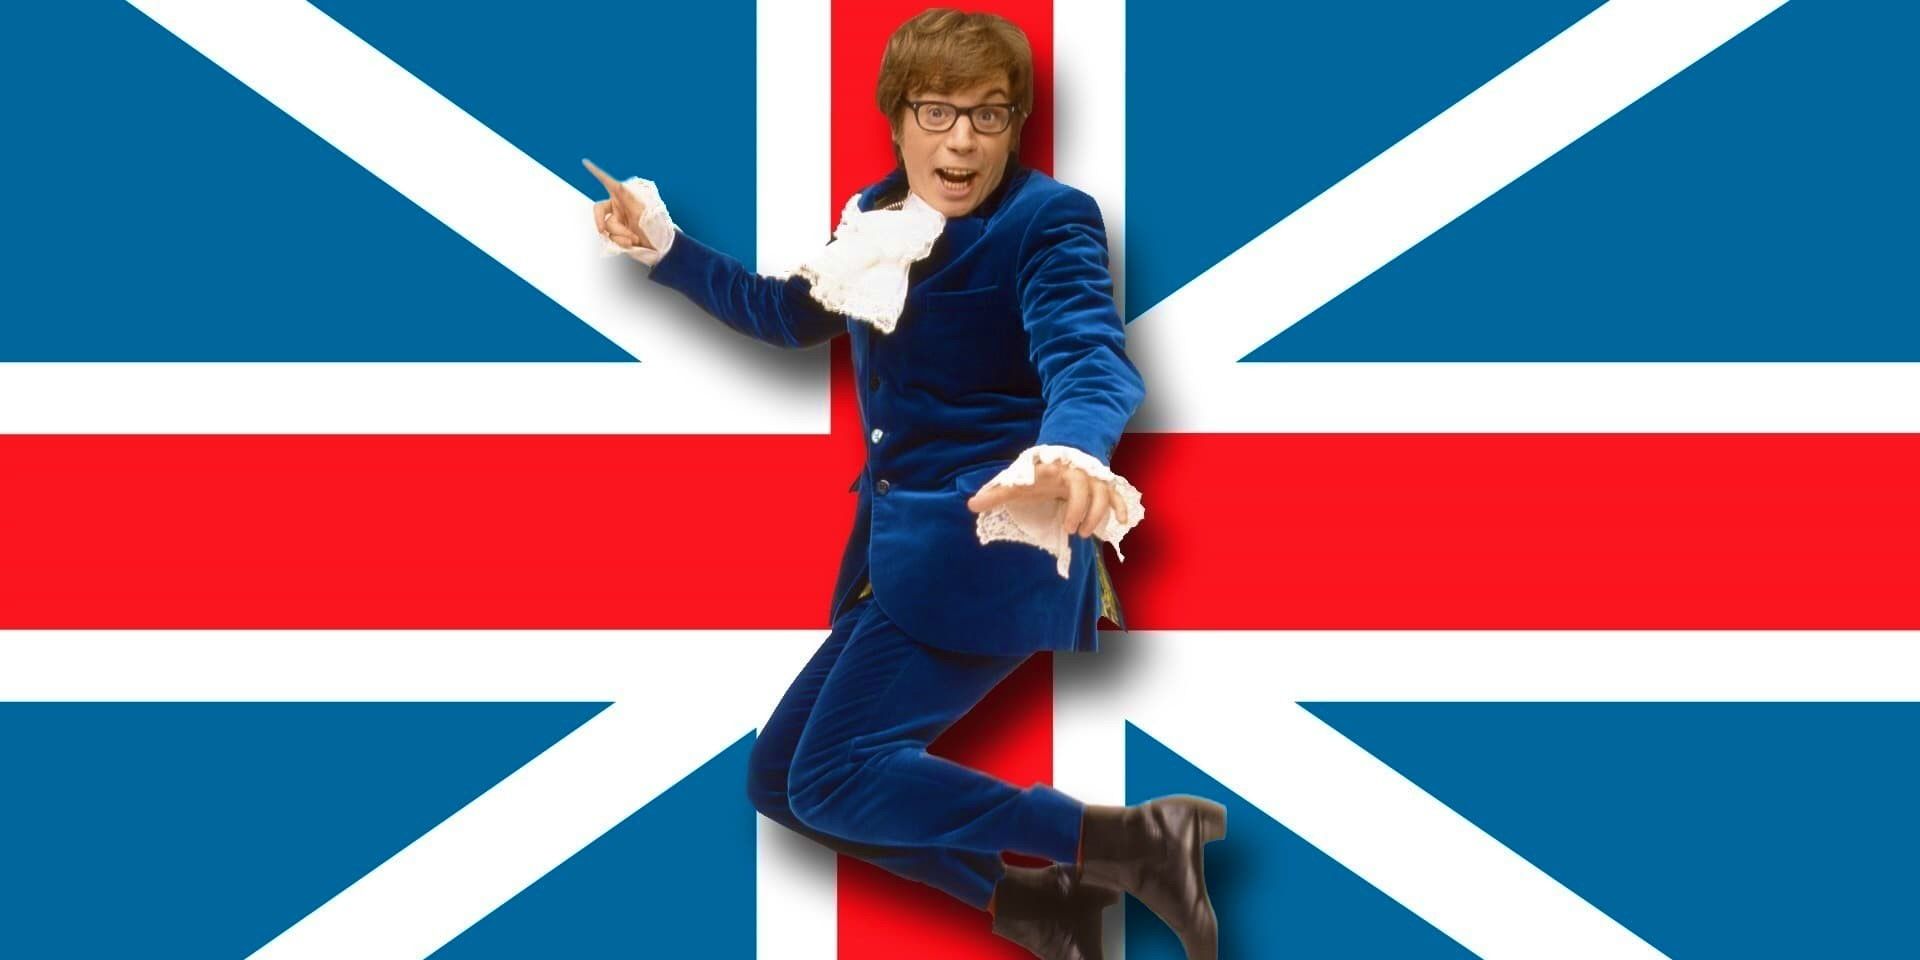 mike myers as austin powers